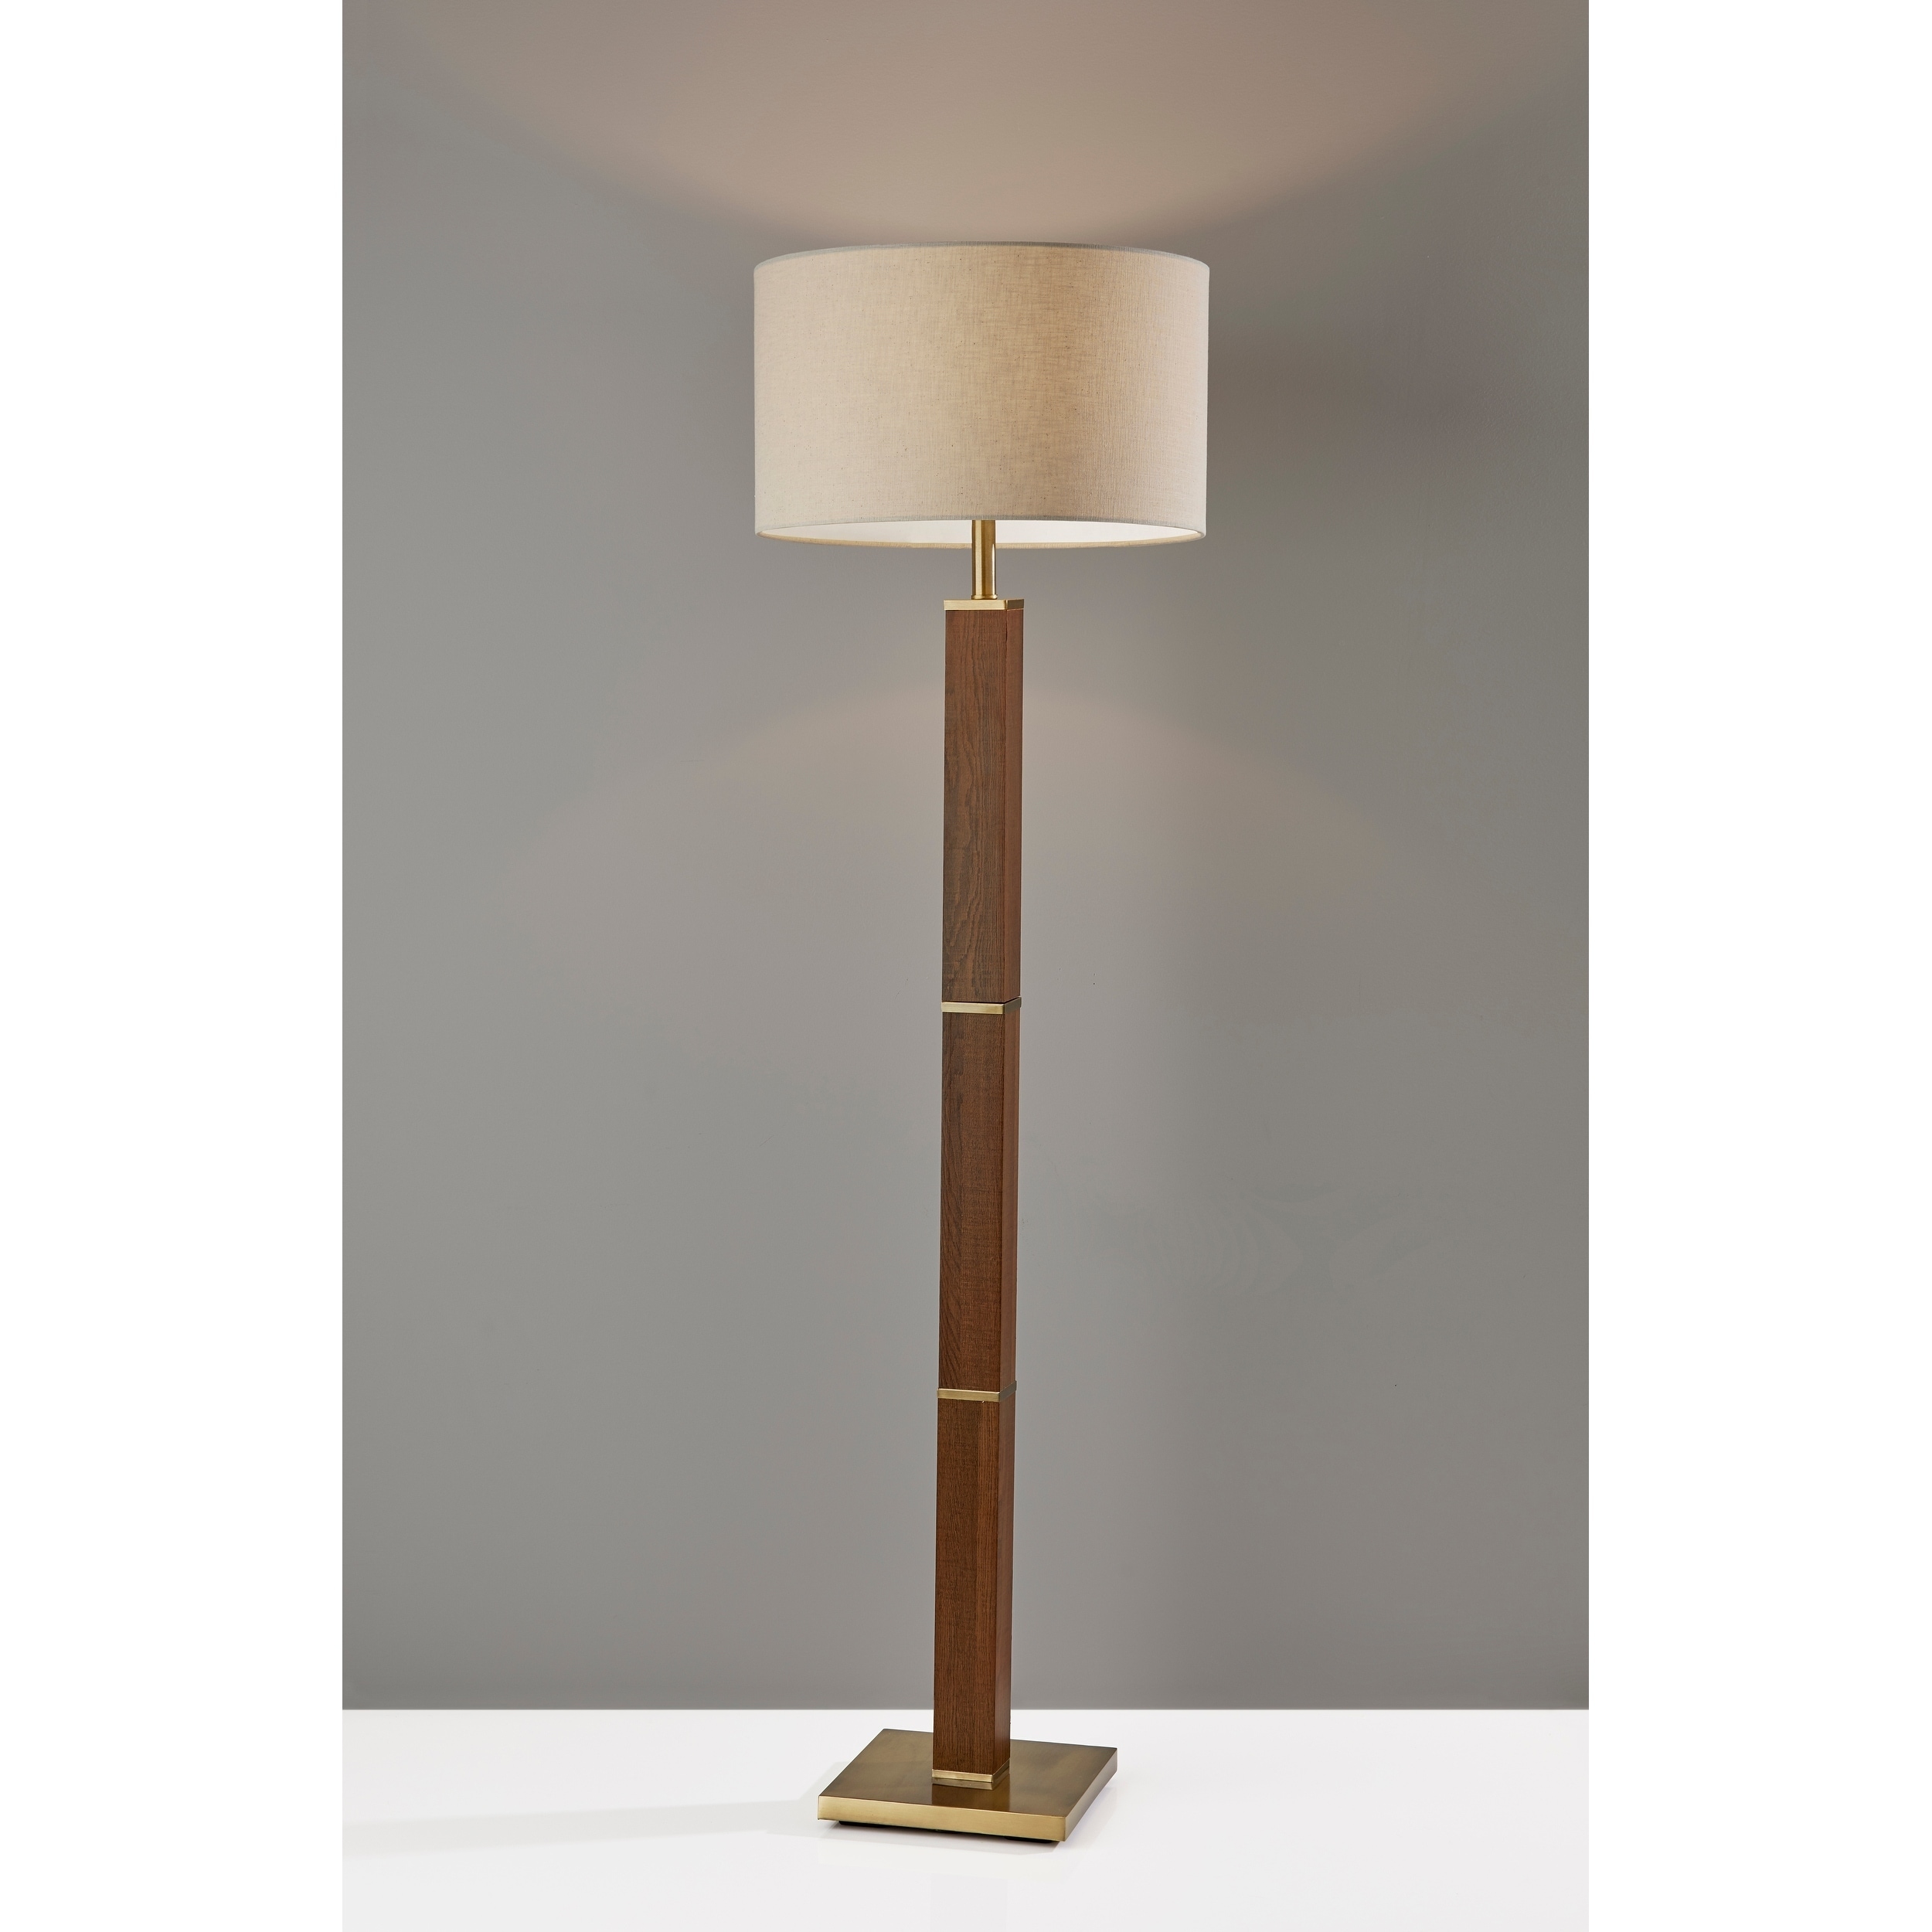 Featured image of post Adesso Walnut Floor Lamp / A wide variety of adesso floor lamp options are available to you, such as lighting solutions service, warranty(year), and certification.